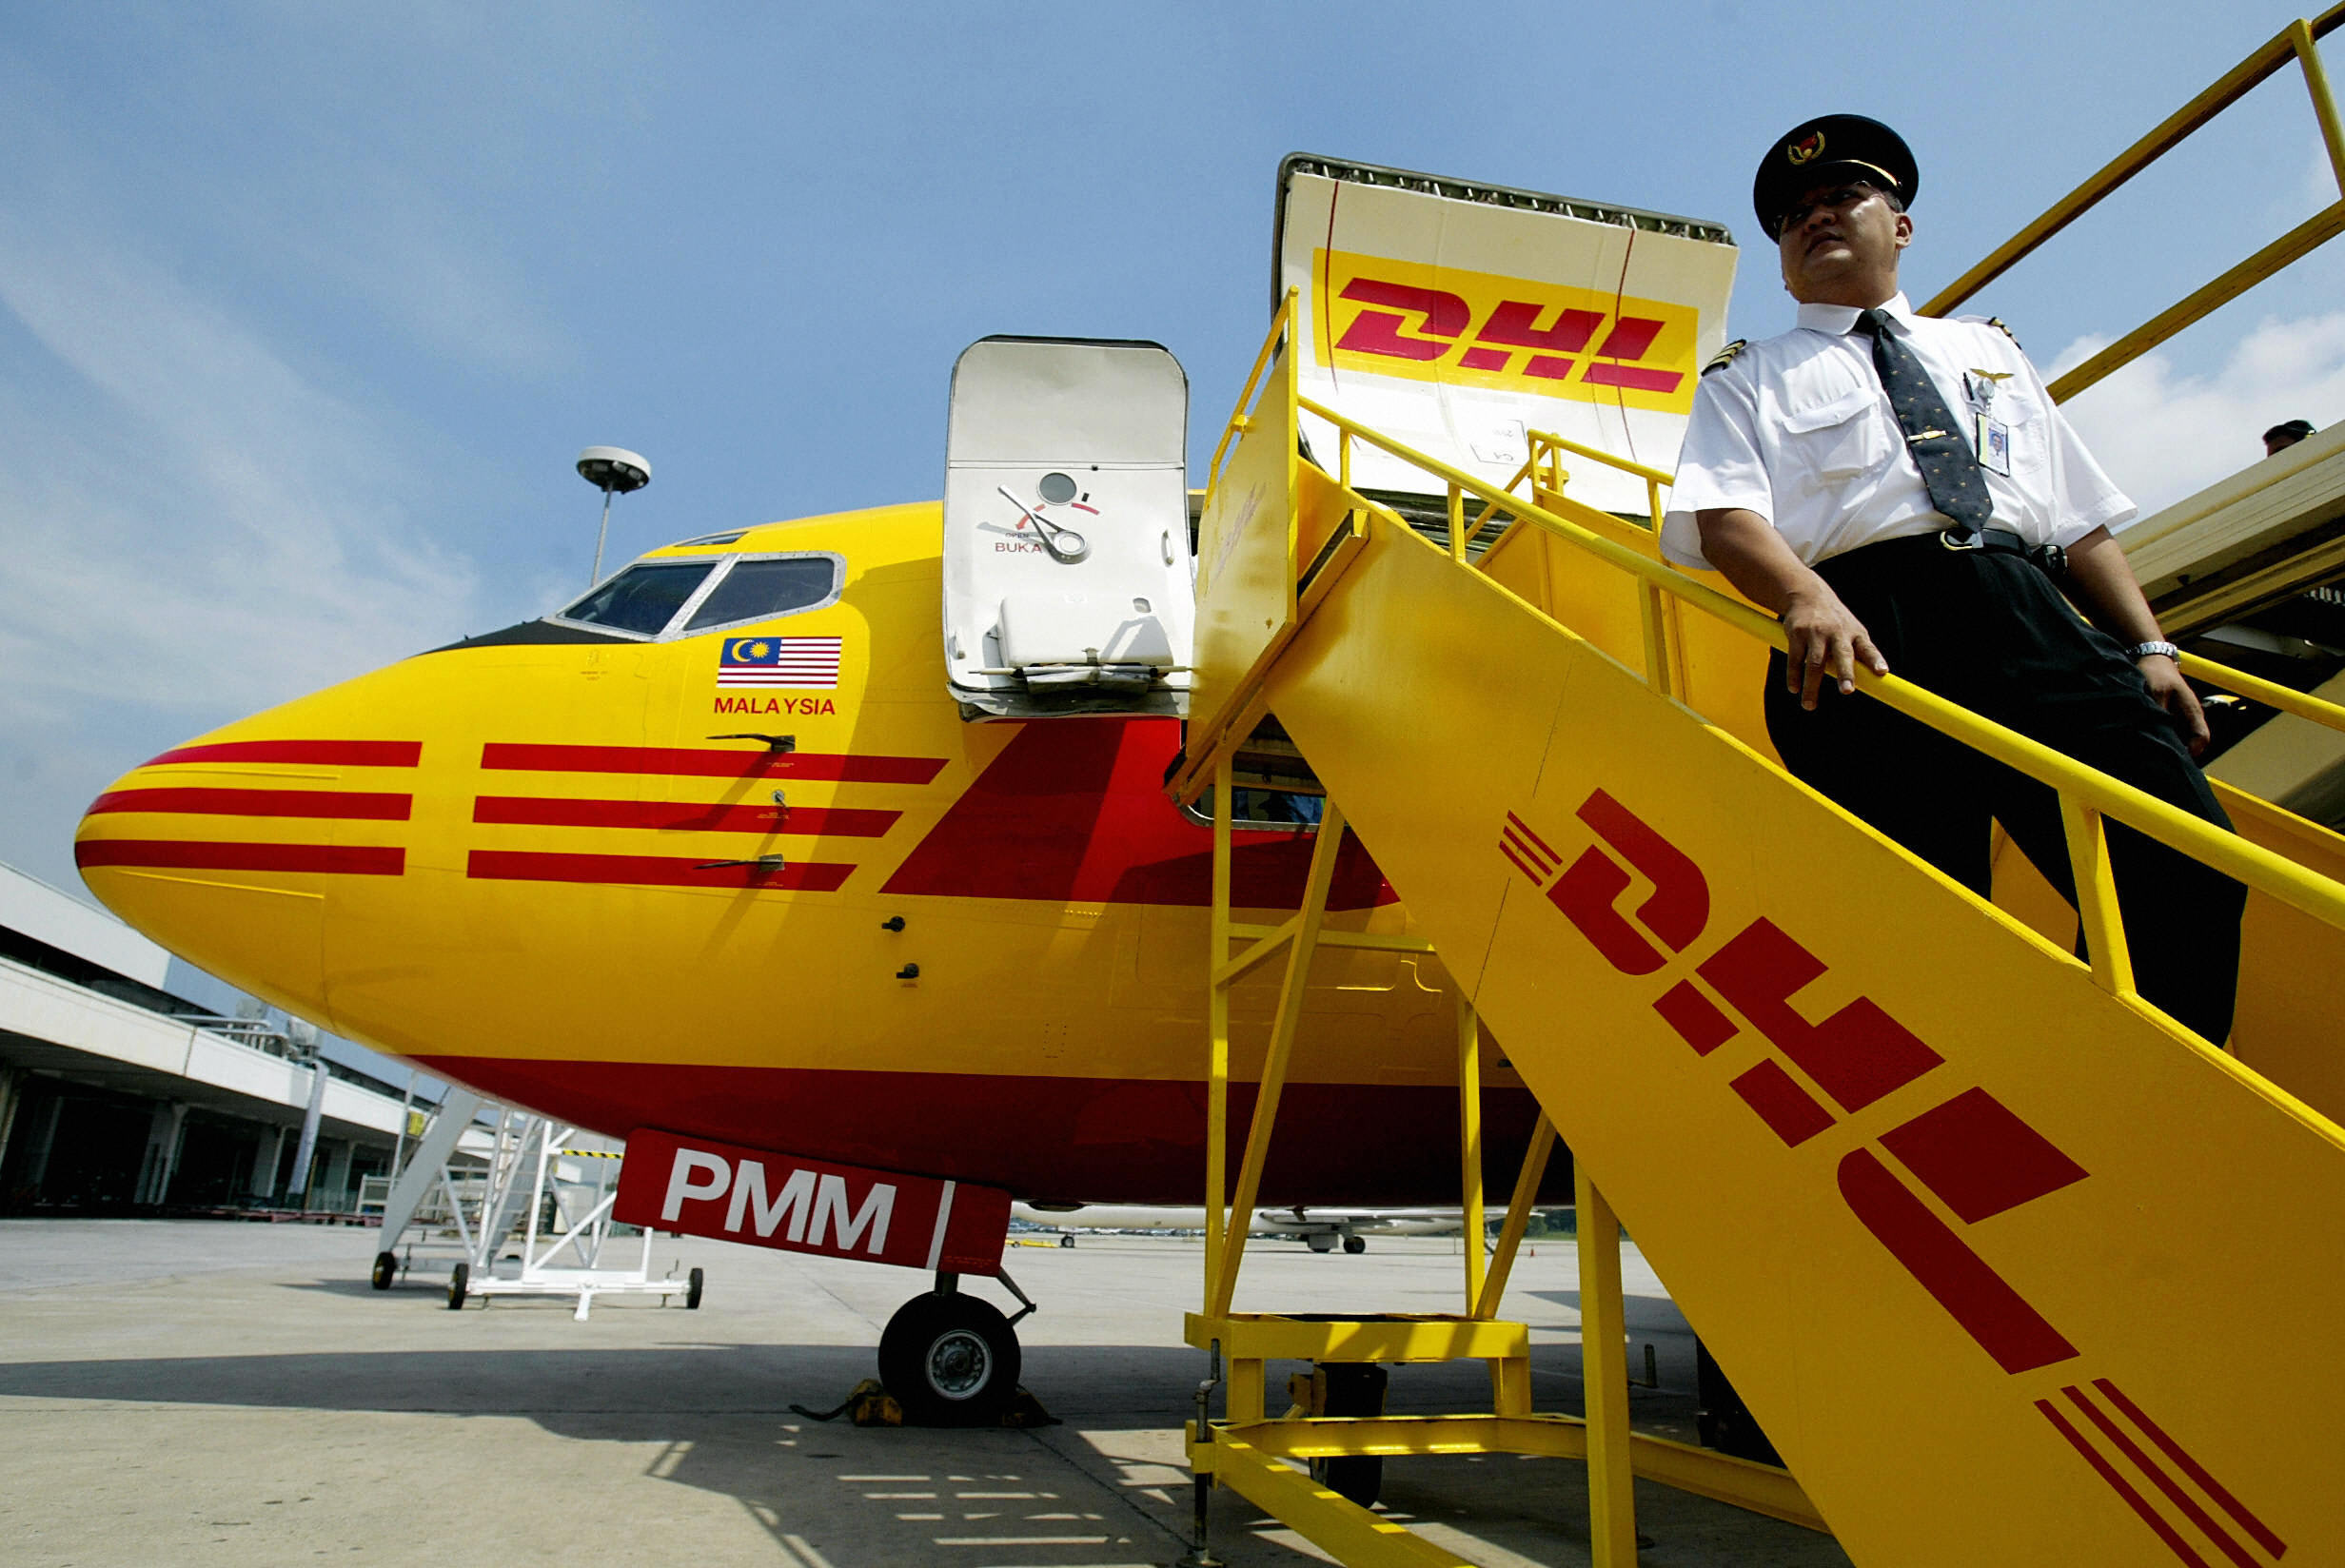 Lacking passengers, regional airline Mesa Air to start flying DHL cargo